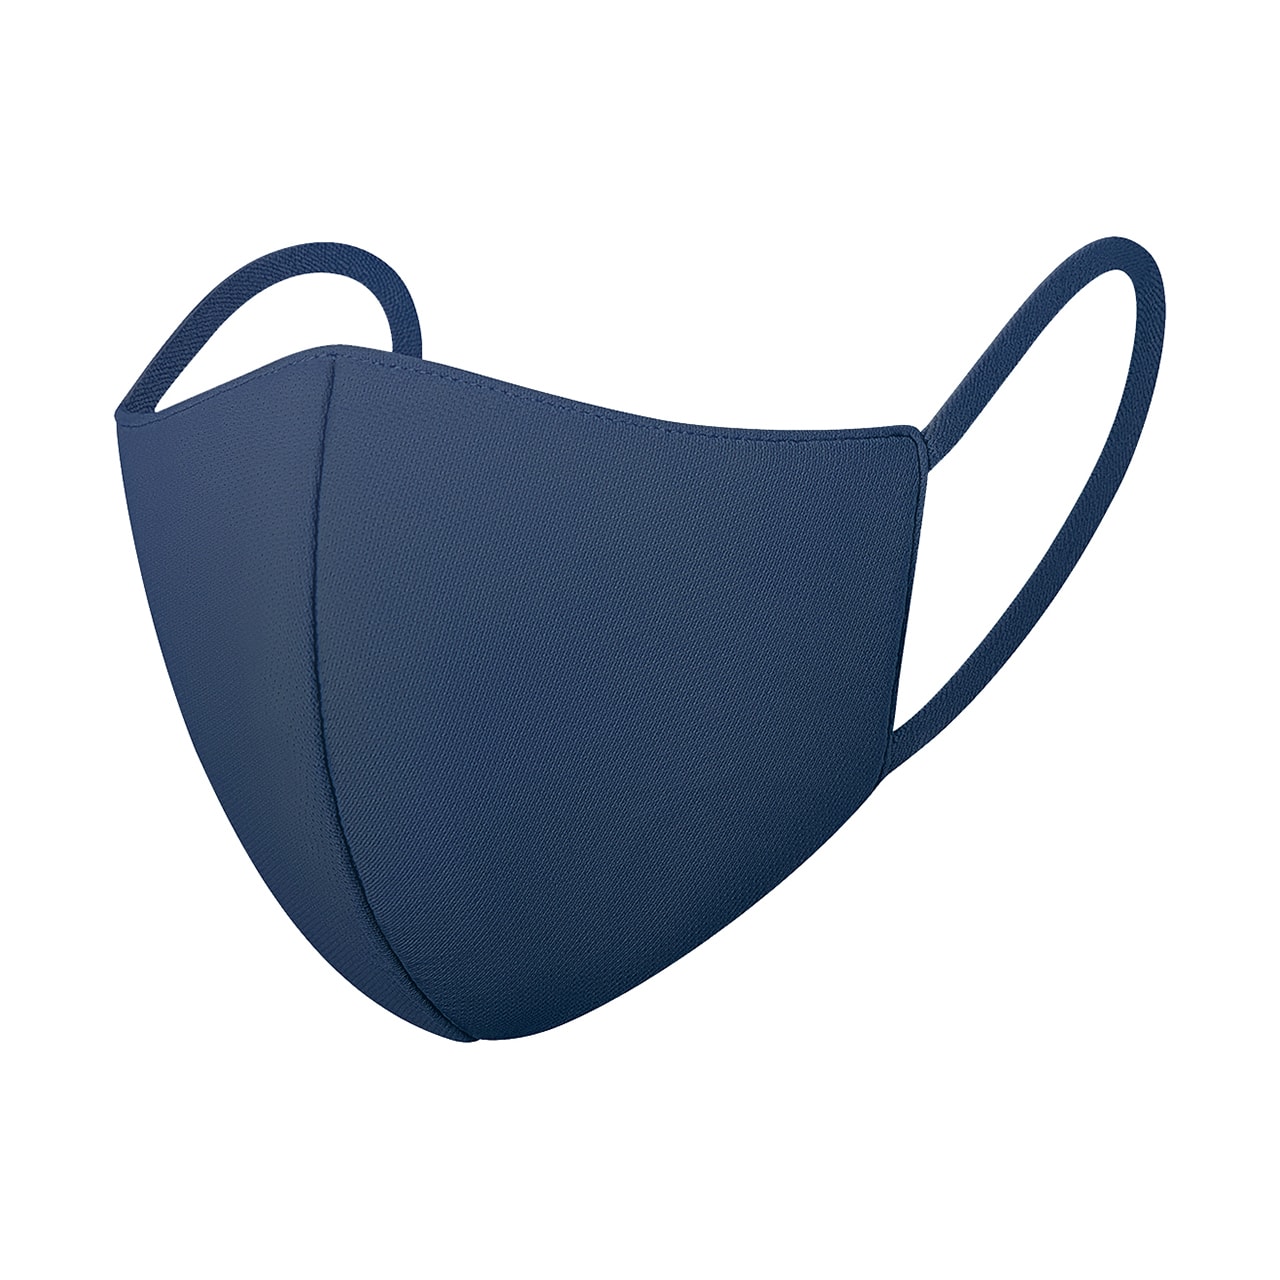 UNIQLO AIRism Face Masks in Navy, Blue and Brown colorways price release date info buy size breathable 